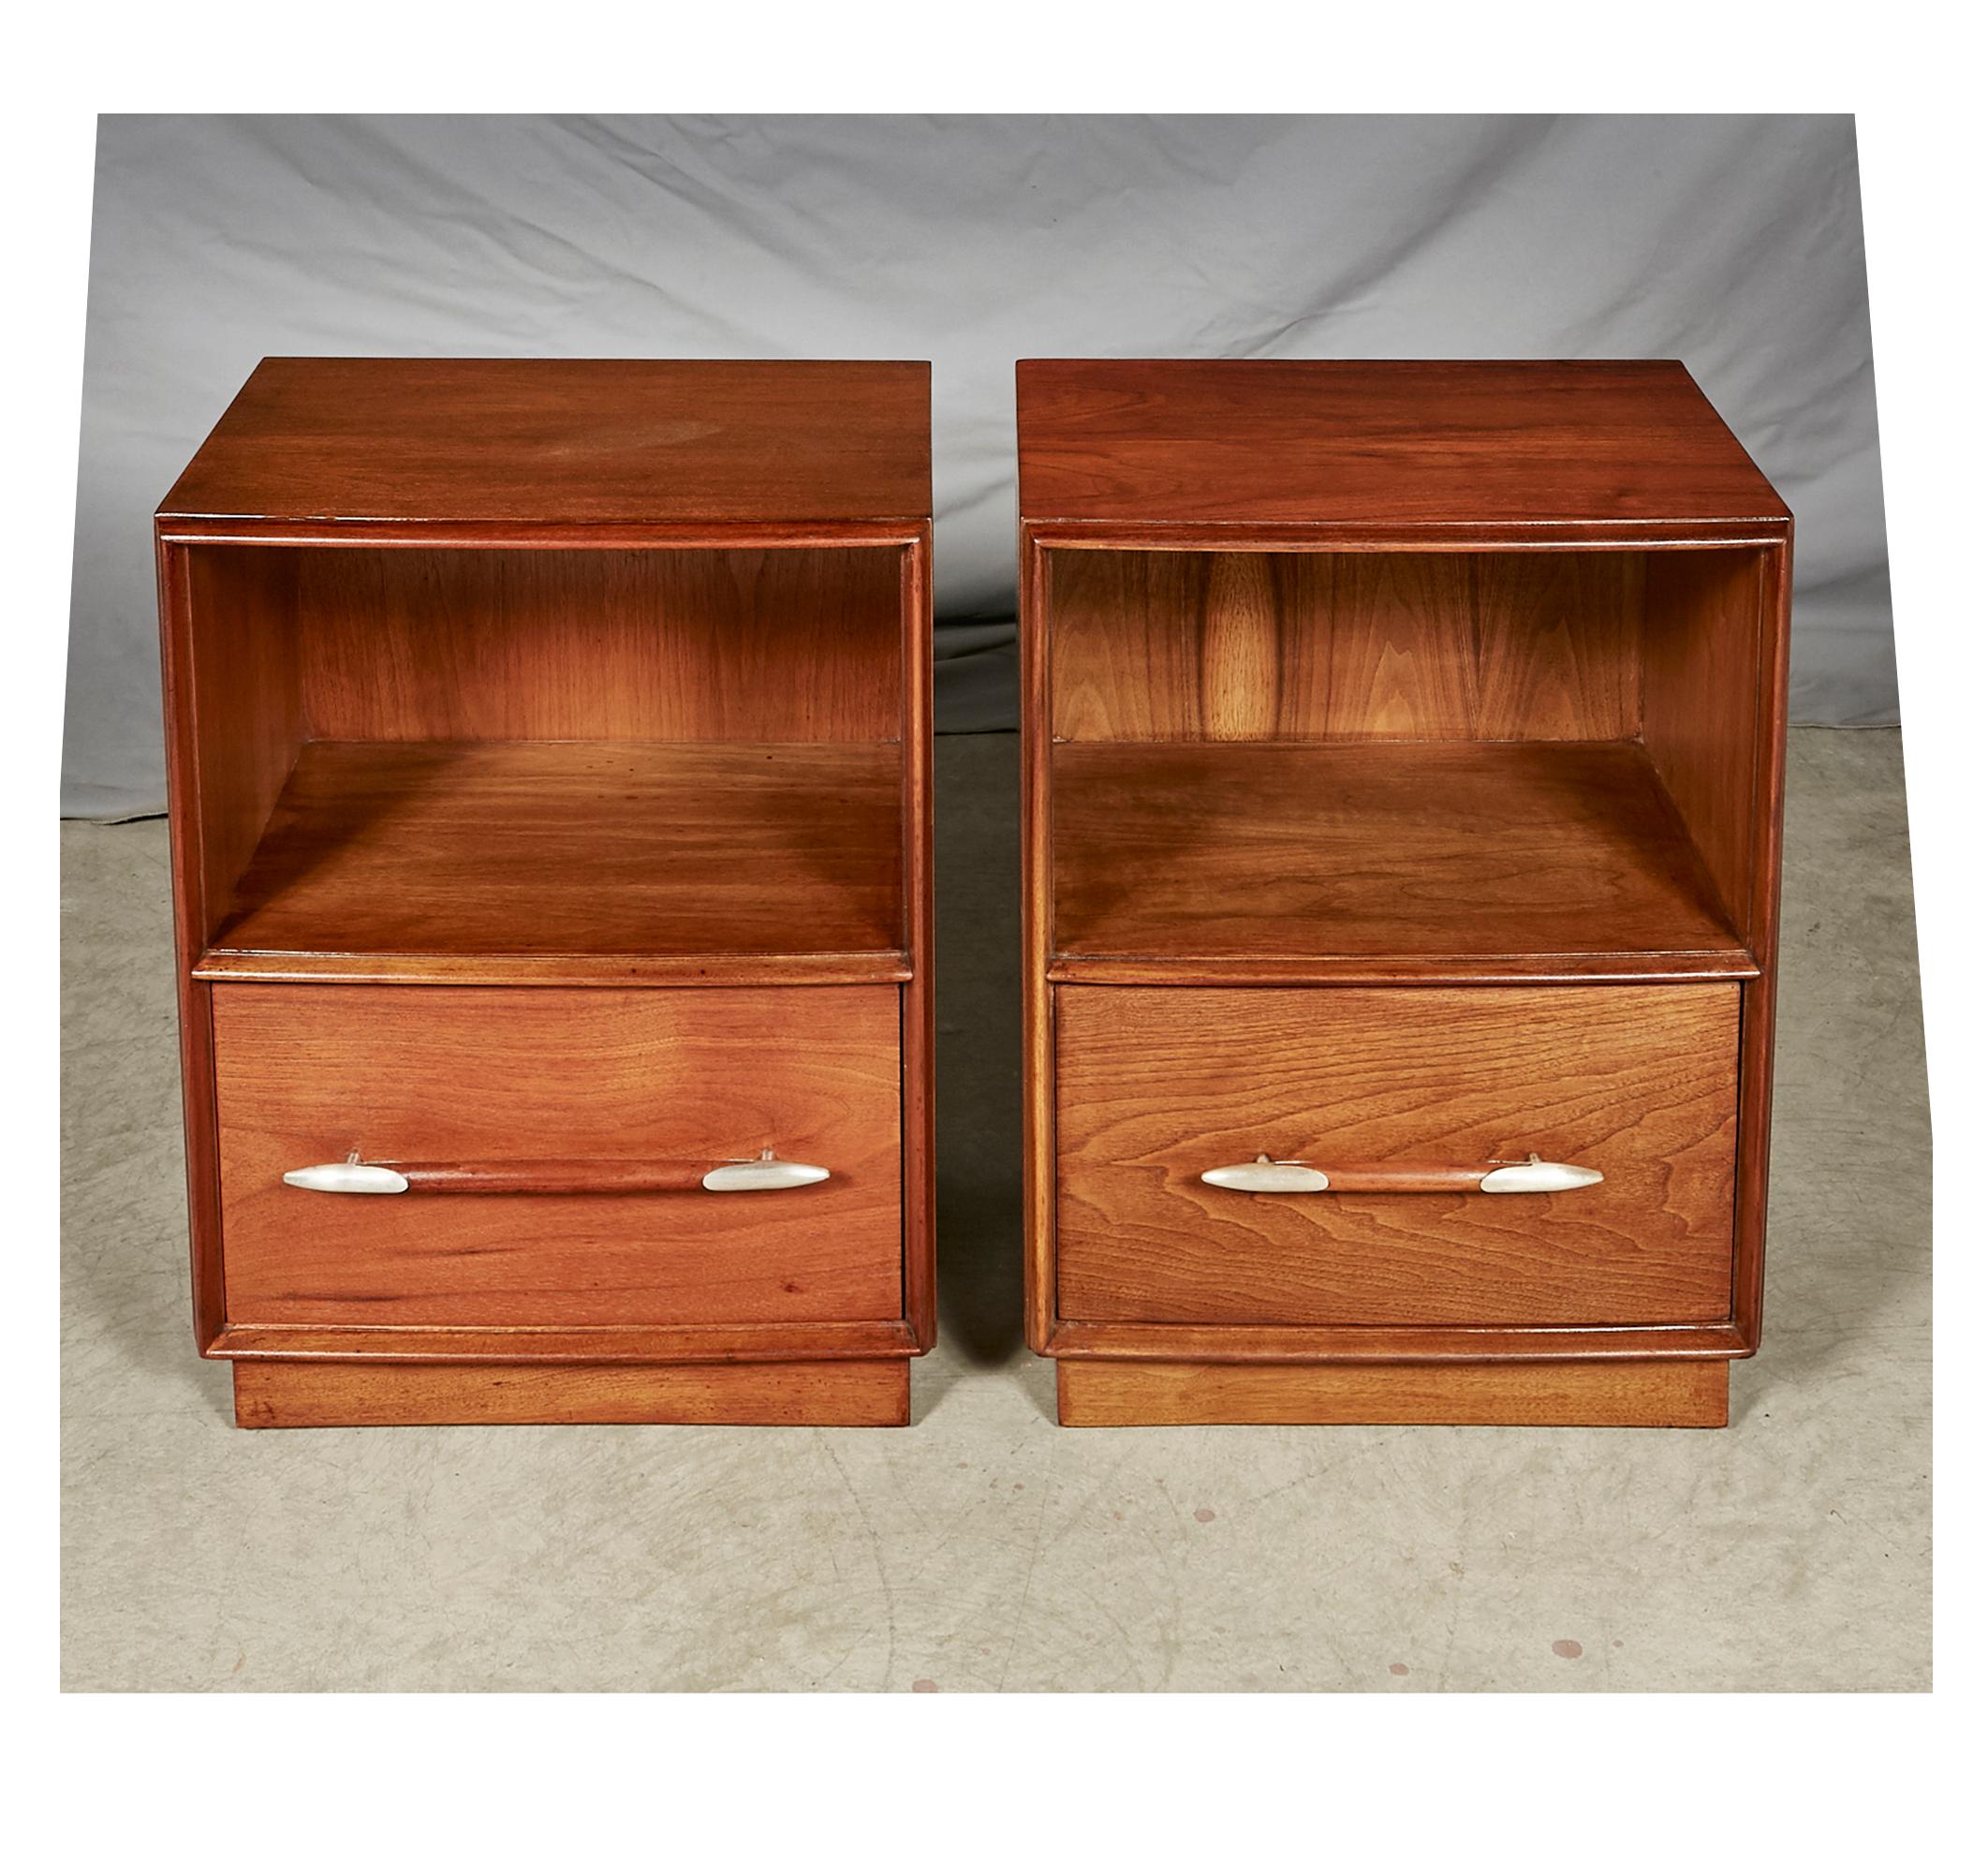 1950s walnut wood pair of nightstands designed by T.H.Robsjohn-Gibbings for Widdicomb Furniture Co. The nightstands have a silver metal accent on the pulls. Fully restored condition, with a small repair to the back of one nightstand. Marked.